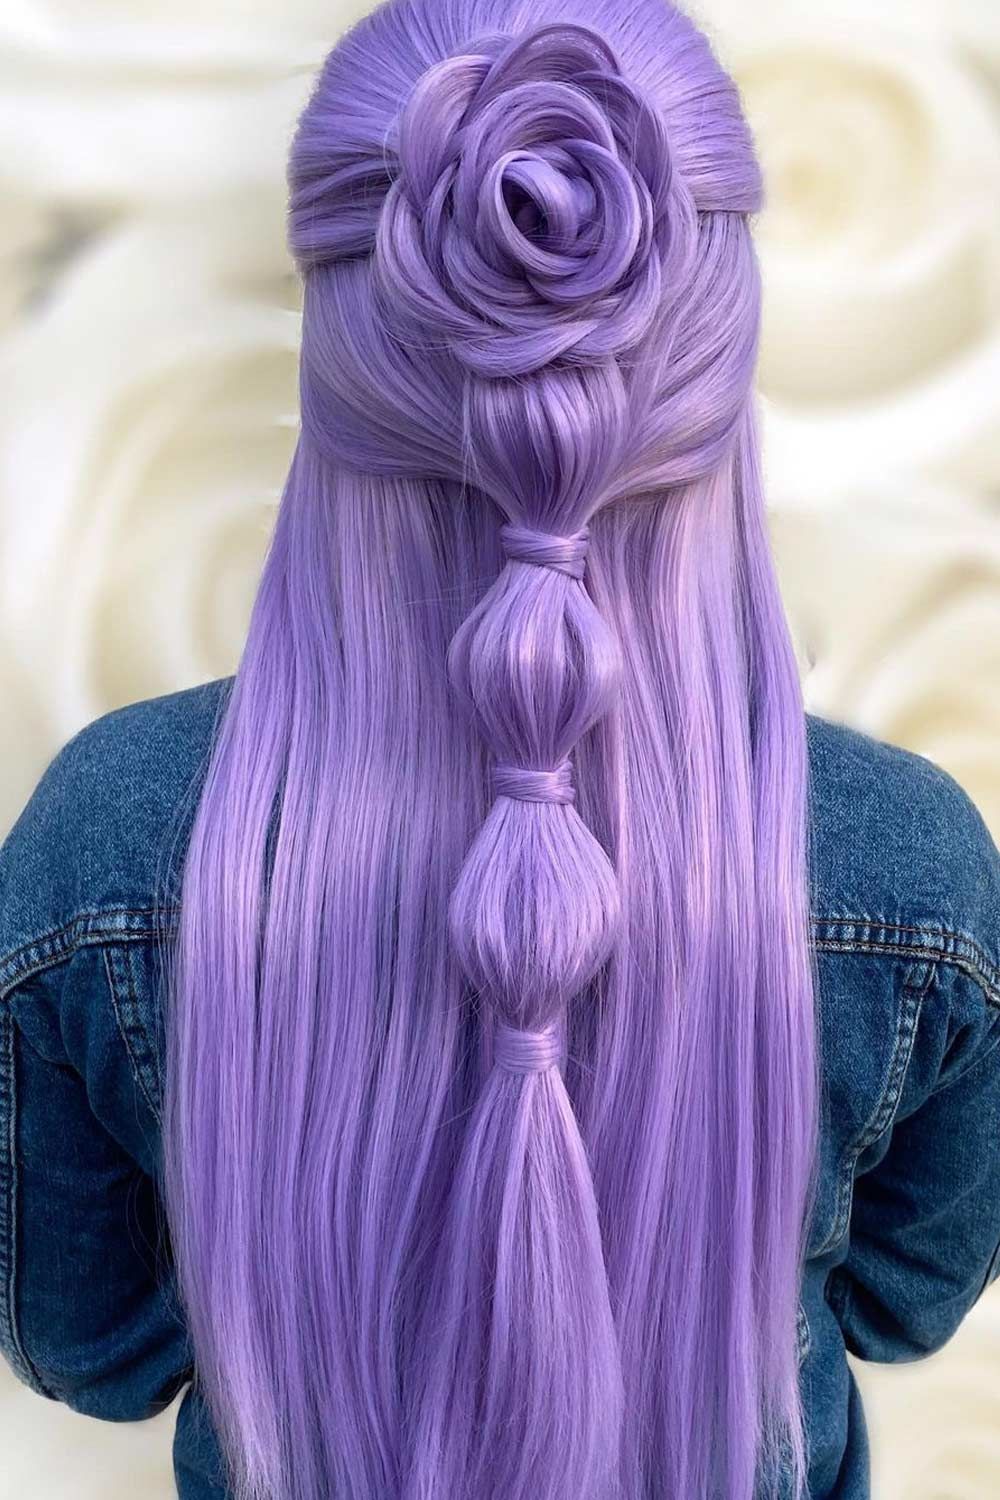 What Is A Rose Braid?